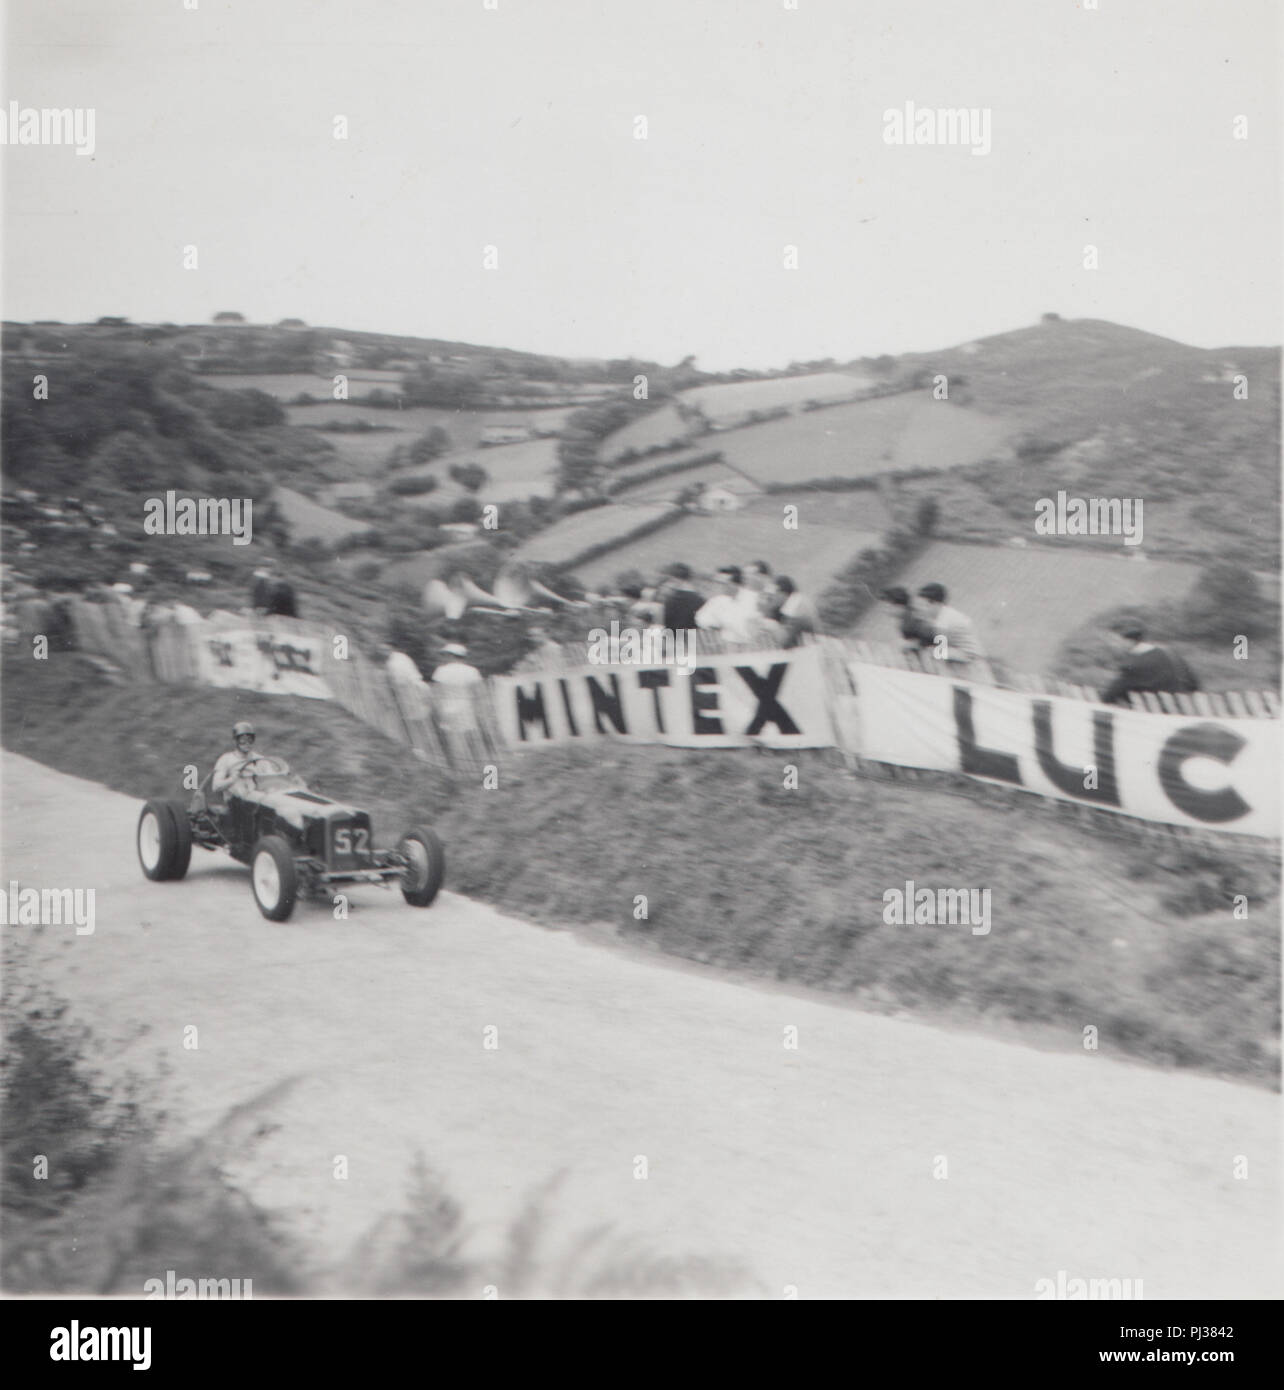 Vintage Photograph of a British Motor Racing Car With Spectators Lining The Roadside. Mintex Luc Barrier Signage. Stock Photo